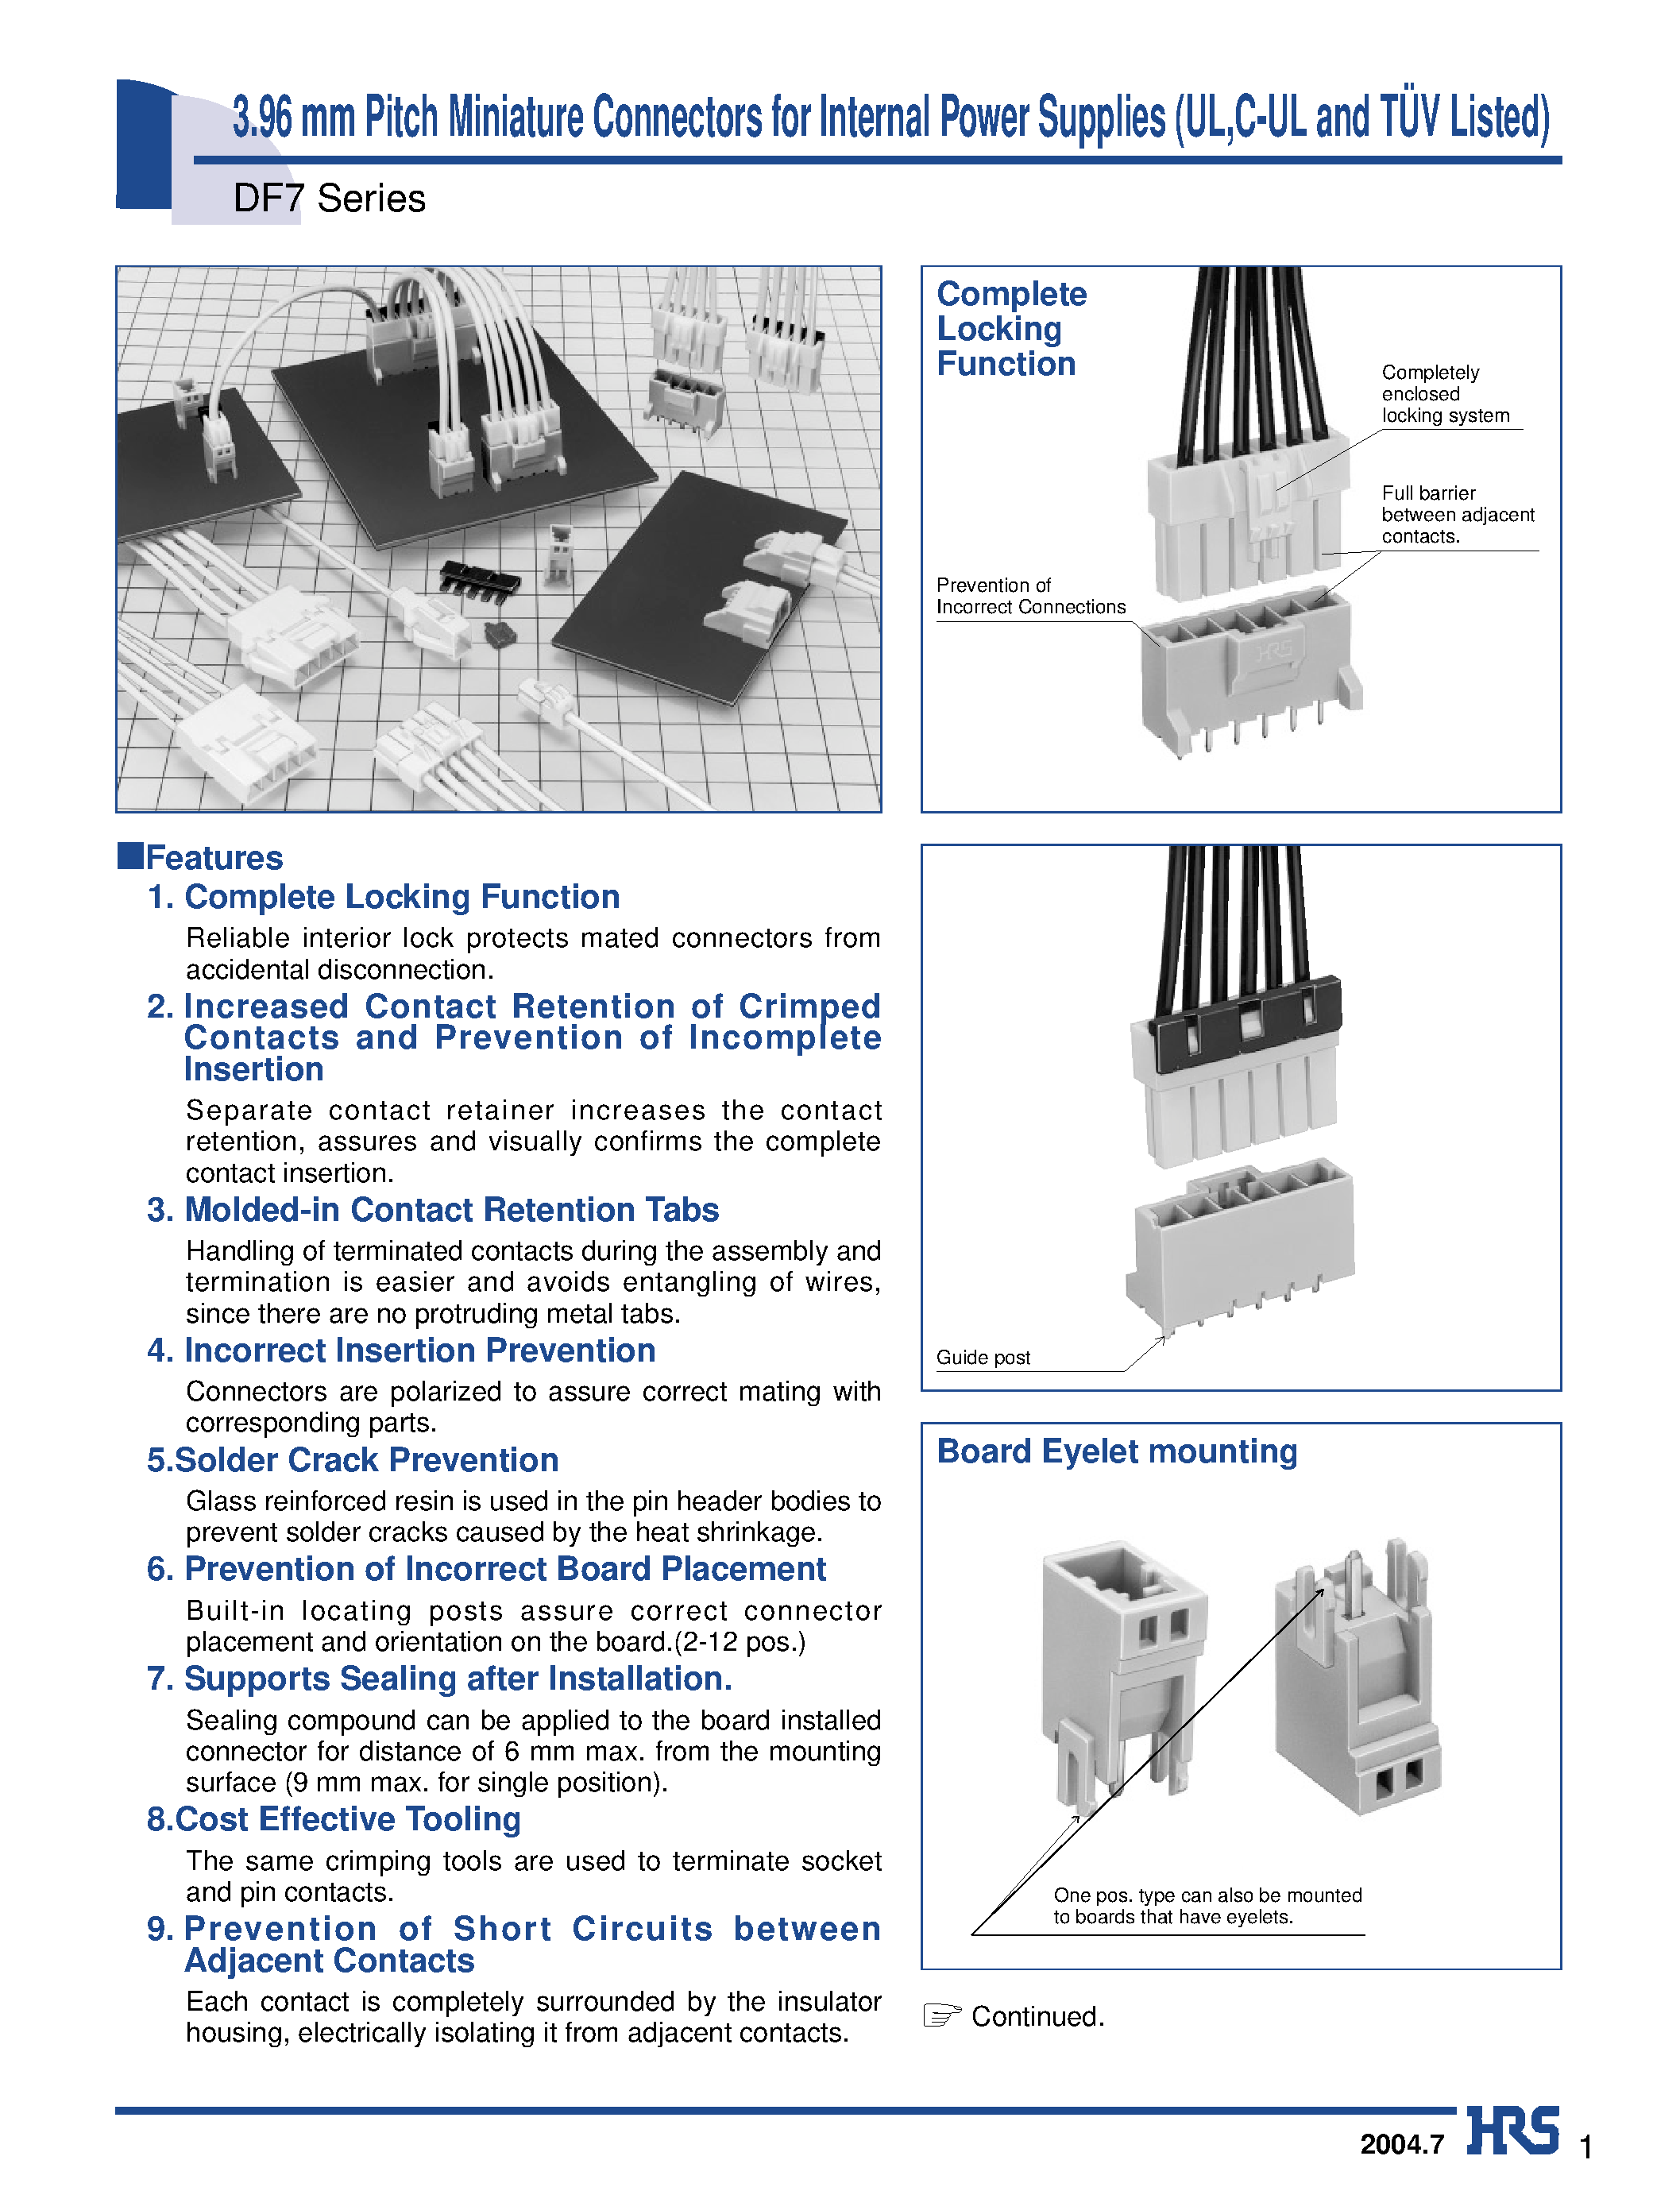 Datasheet DF7-1P-3.96C - 3.96 mm Pitch Miniature Connectors for Internal Power Supplies (UL /C-UL and TUV Listed) page 1